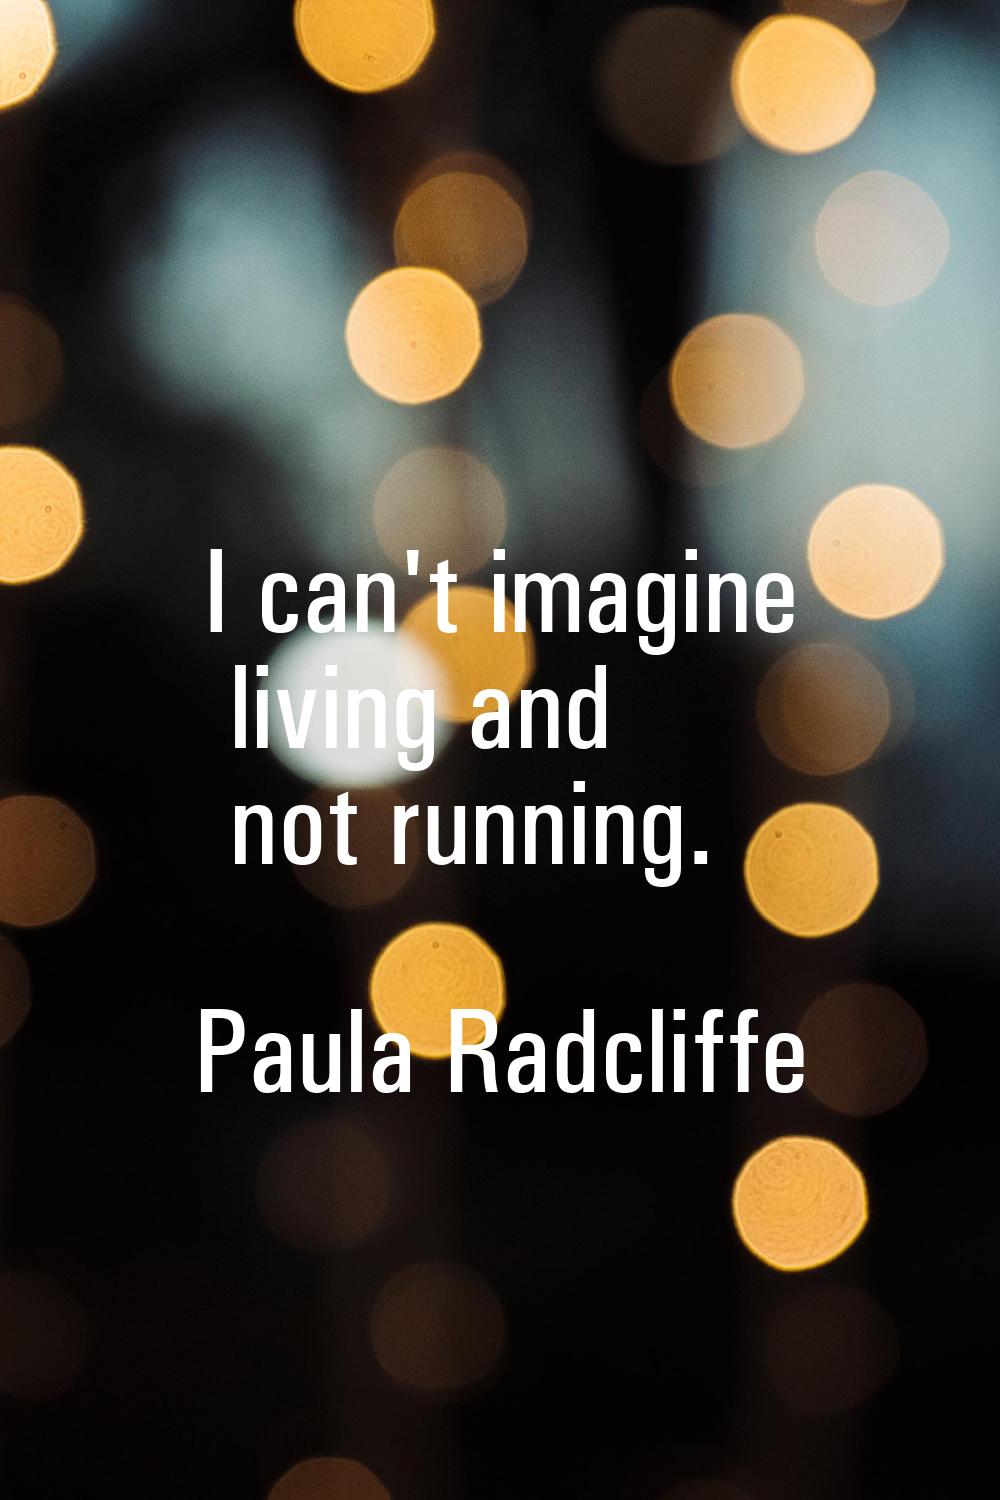 I can't imagine living and not running.